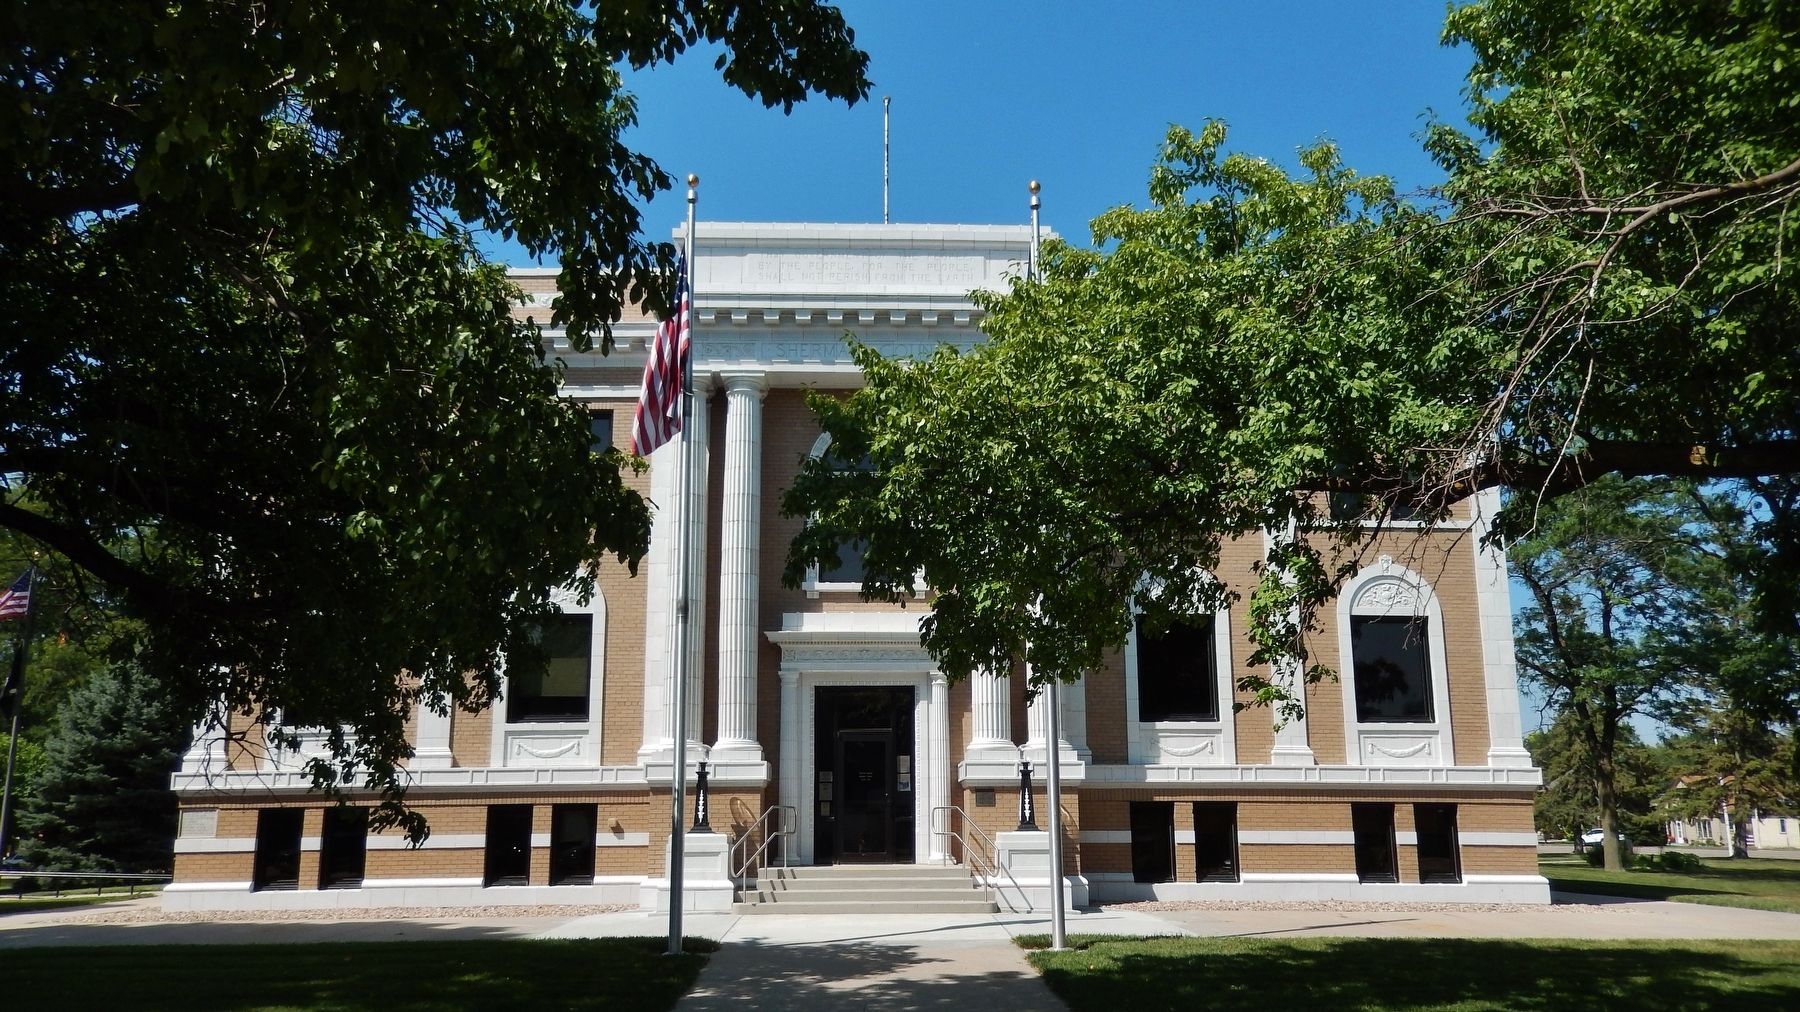 Sherman County Courthouse (<i>front/south elevation</i>) image. Click for full size.